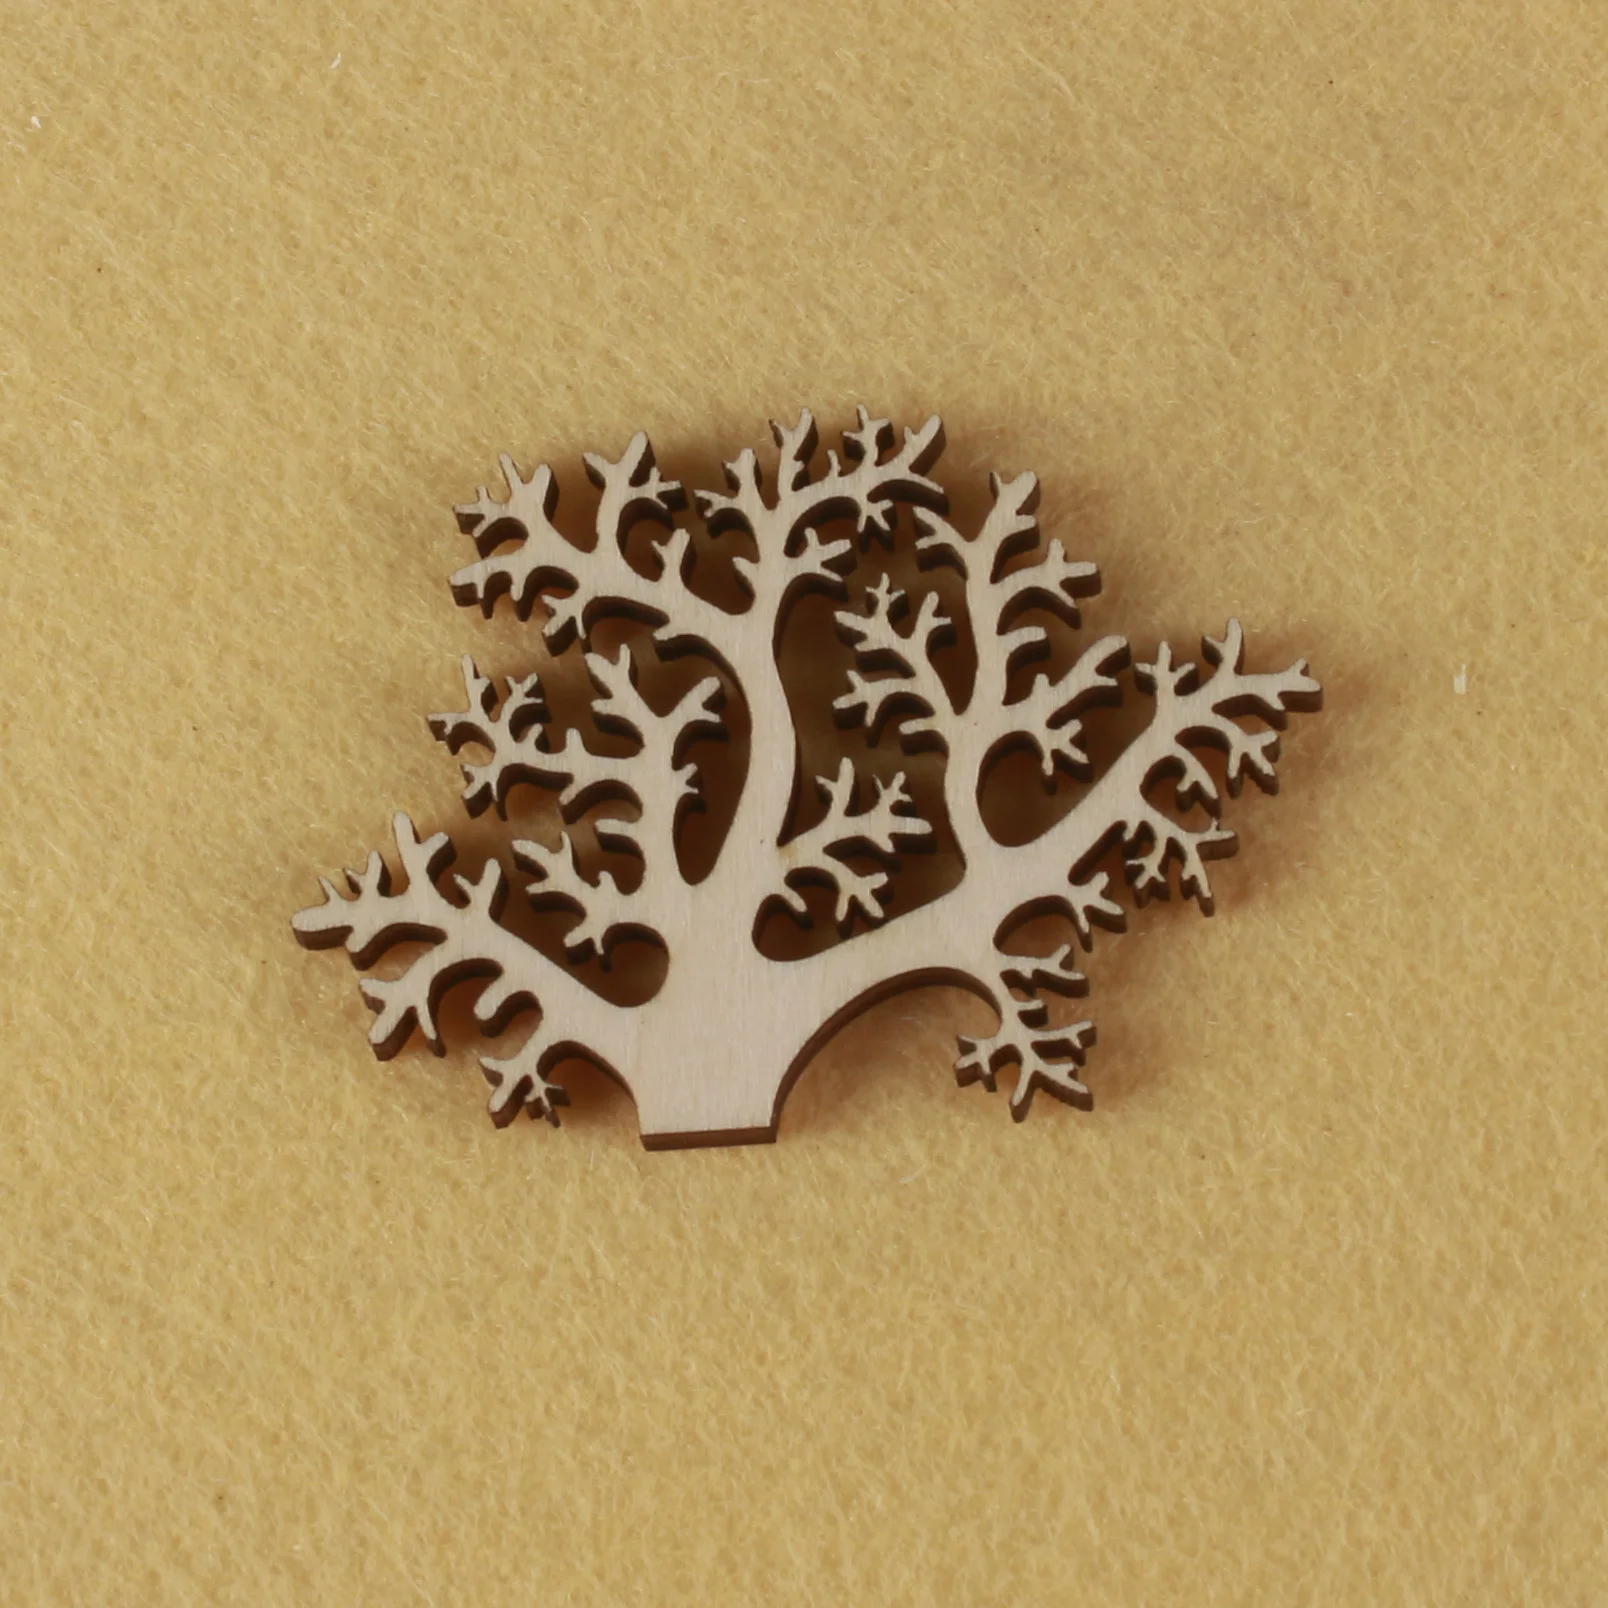 

Coral formations, mascot laser cut, Christmas decorations, silhouette, blank unpainted, 25 pieces, wooden shape (0748).